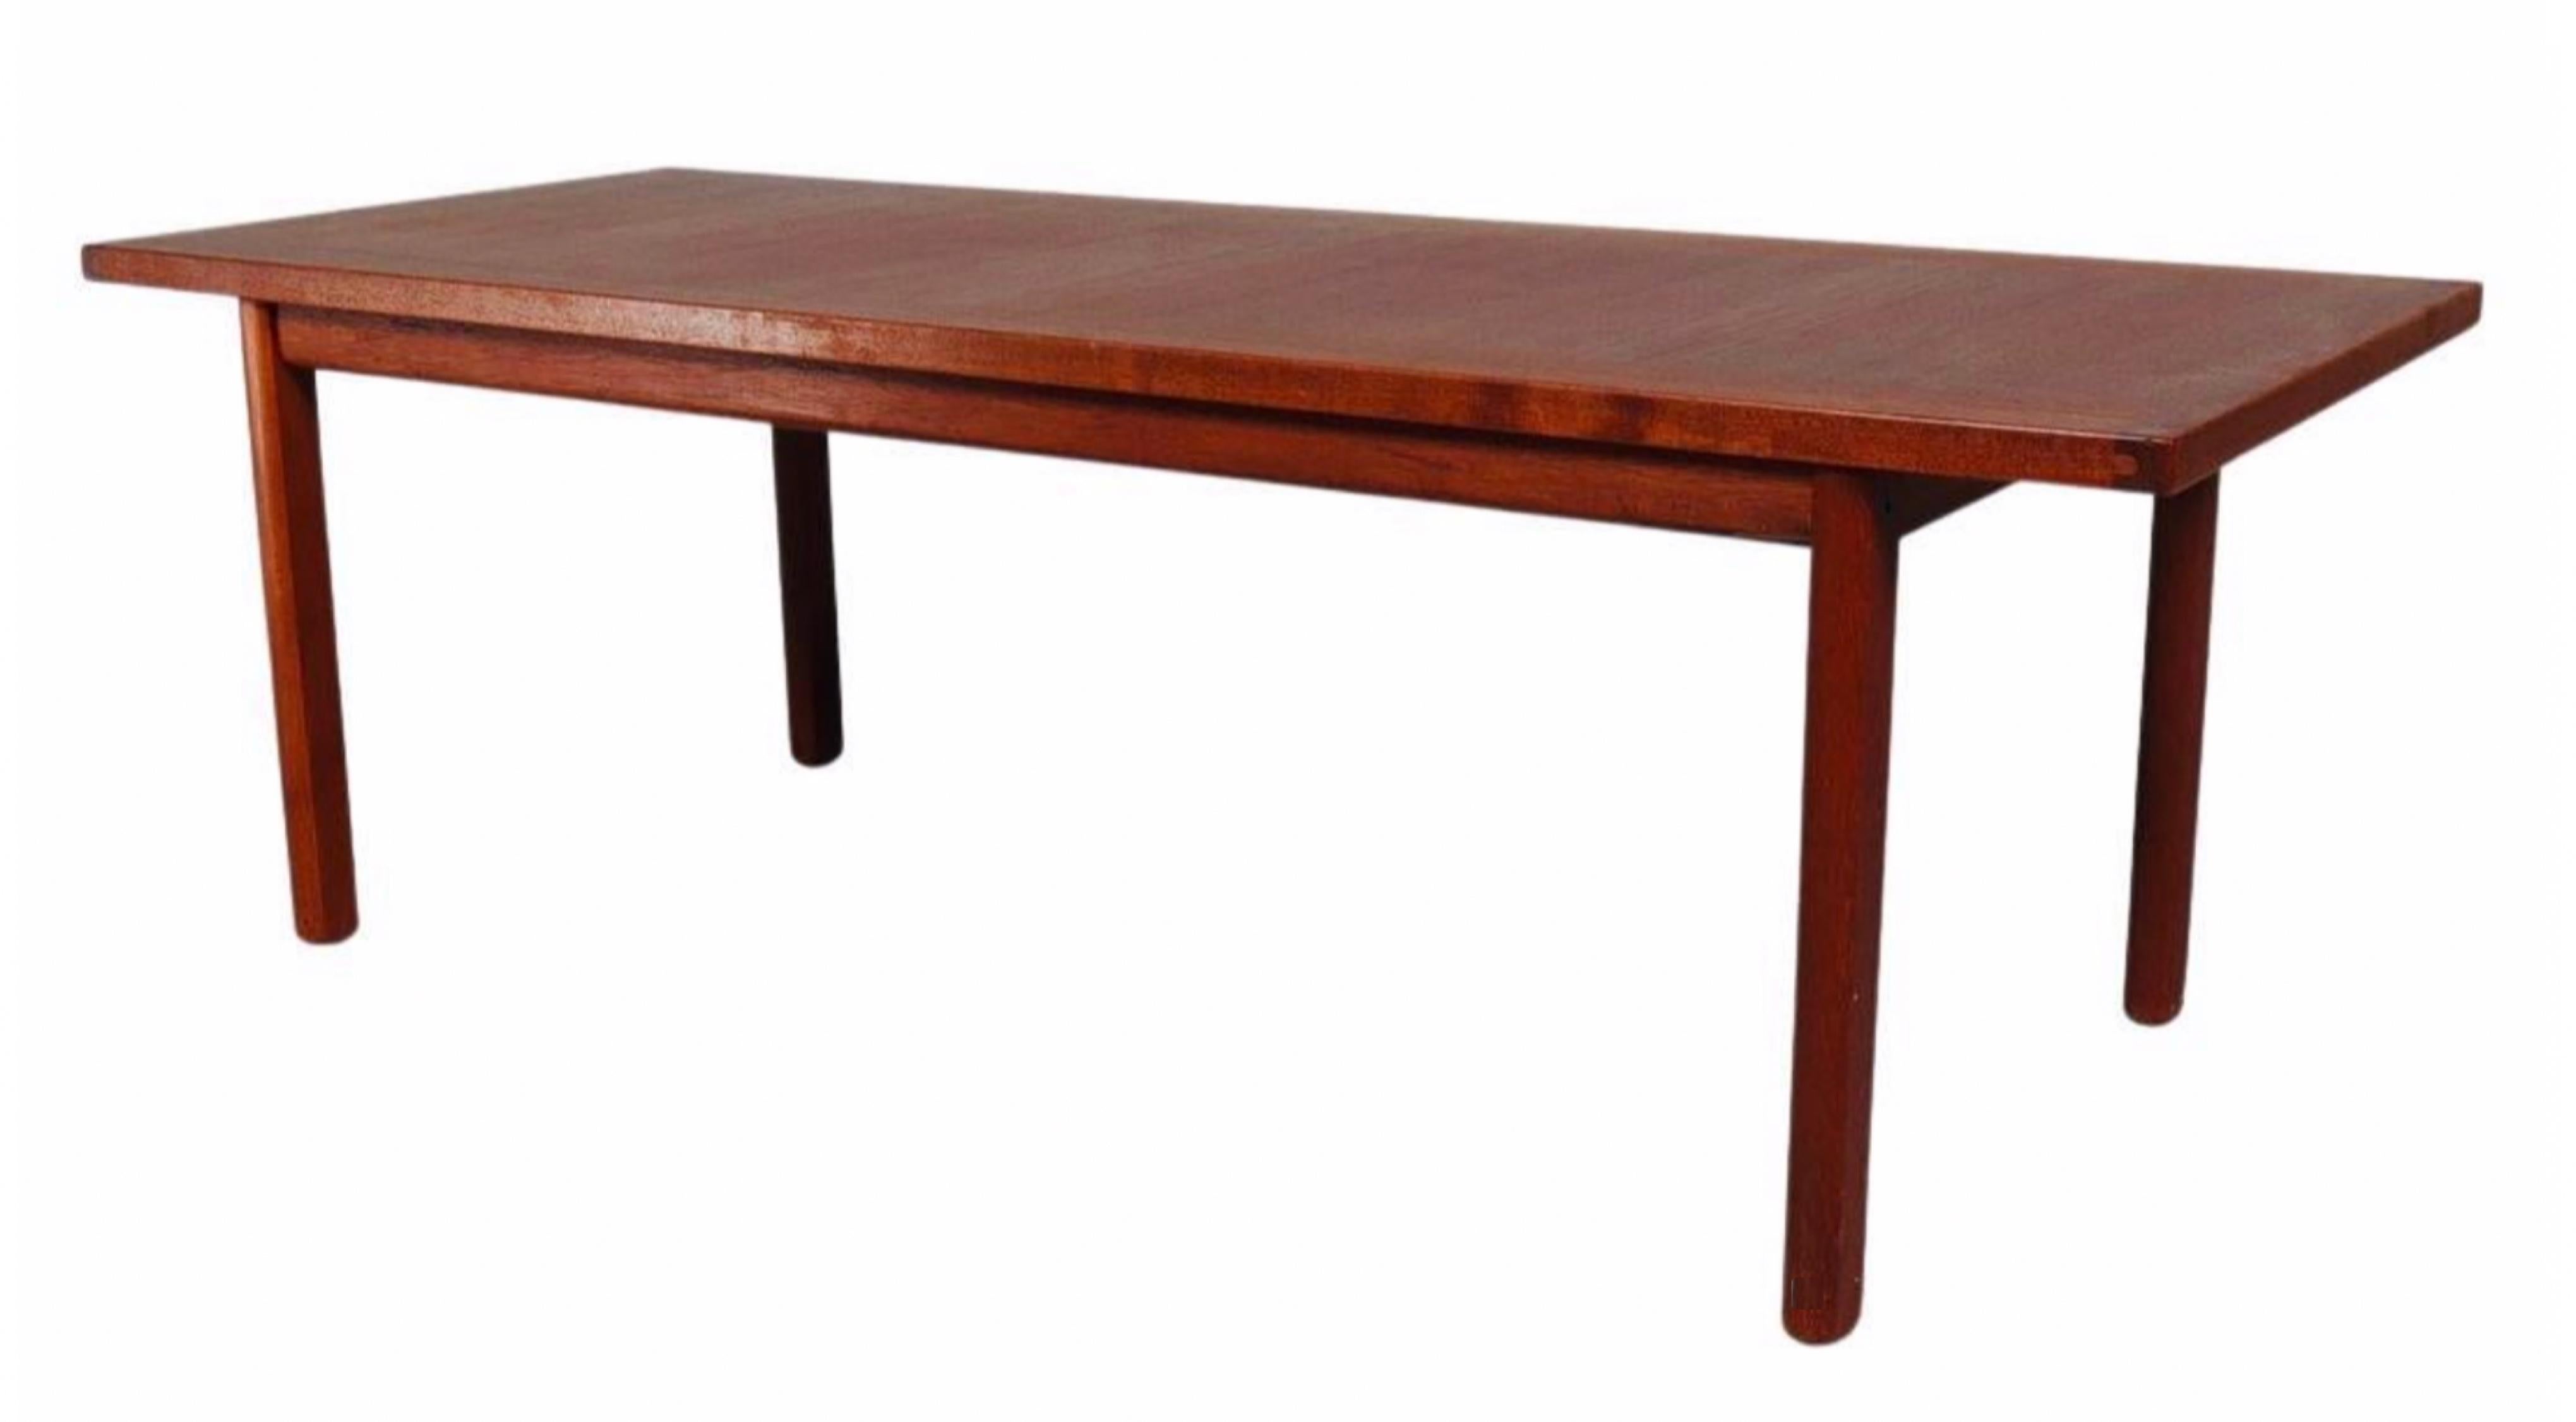 Elegant and beautiful Danish midcentury coffee table in teak.

Gently and expertly refinished to excellent condition.

NielsenClassics delivers the absolute highest quality of vintage Danish and Scandinavian midcentury classics. All our furniture is